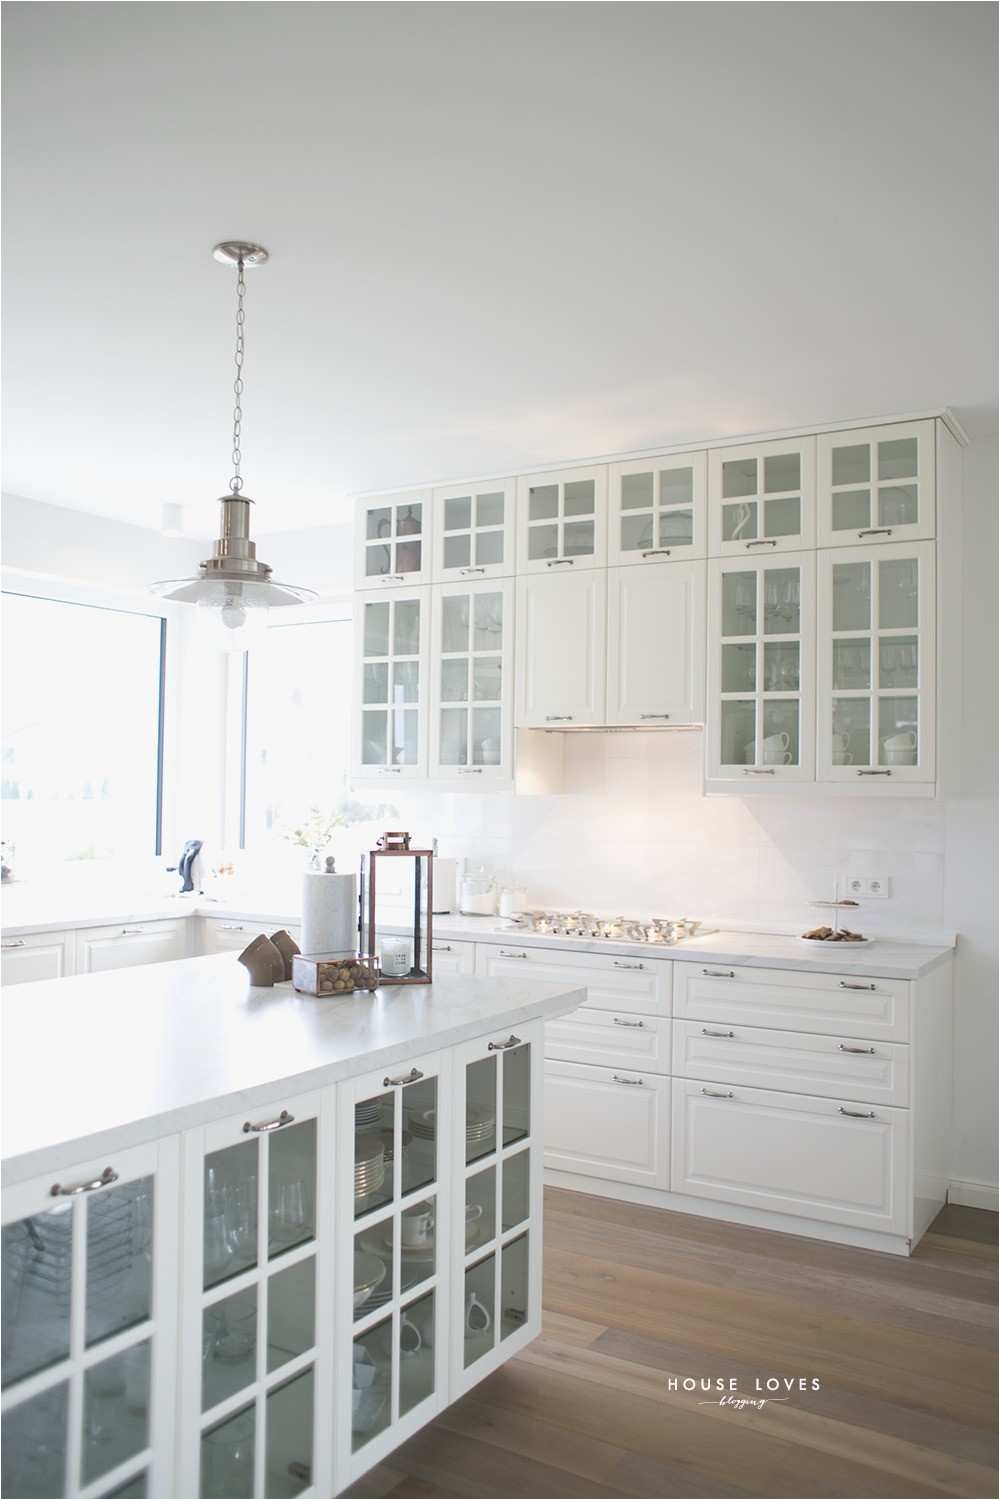 How Tall are Kitchen Cabinets Lovely Tall White Kitchen Cabinets Awesome Od Inspiracji Do Realizacji 8